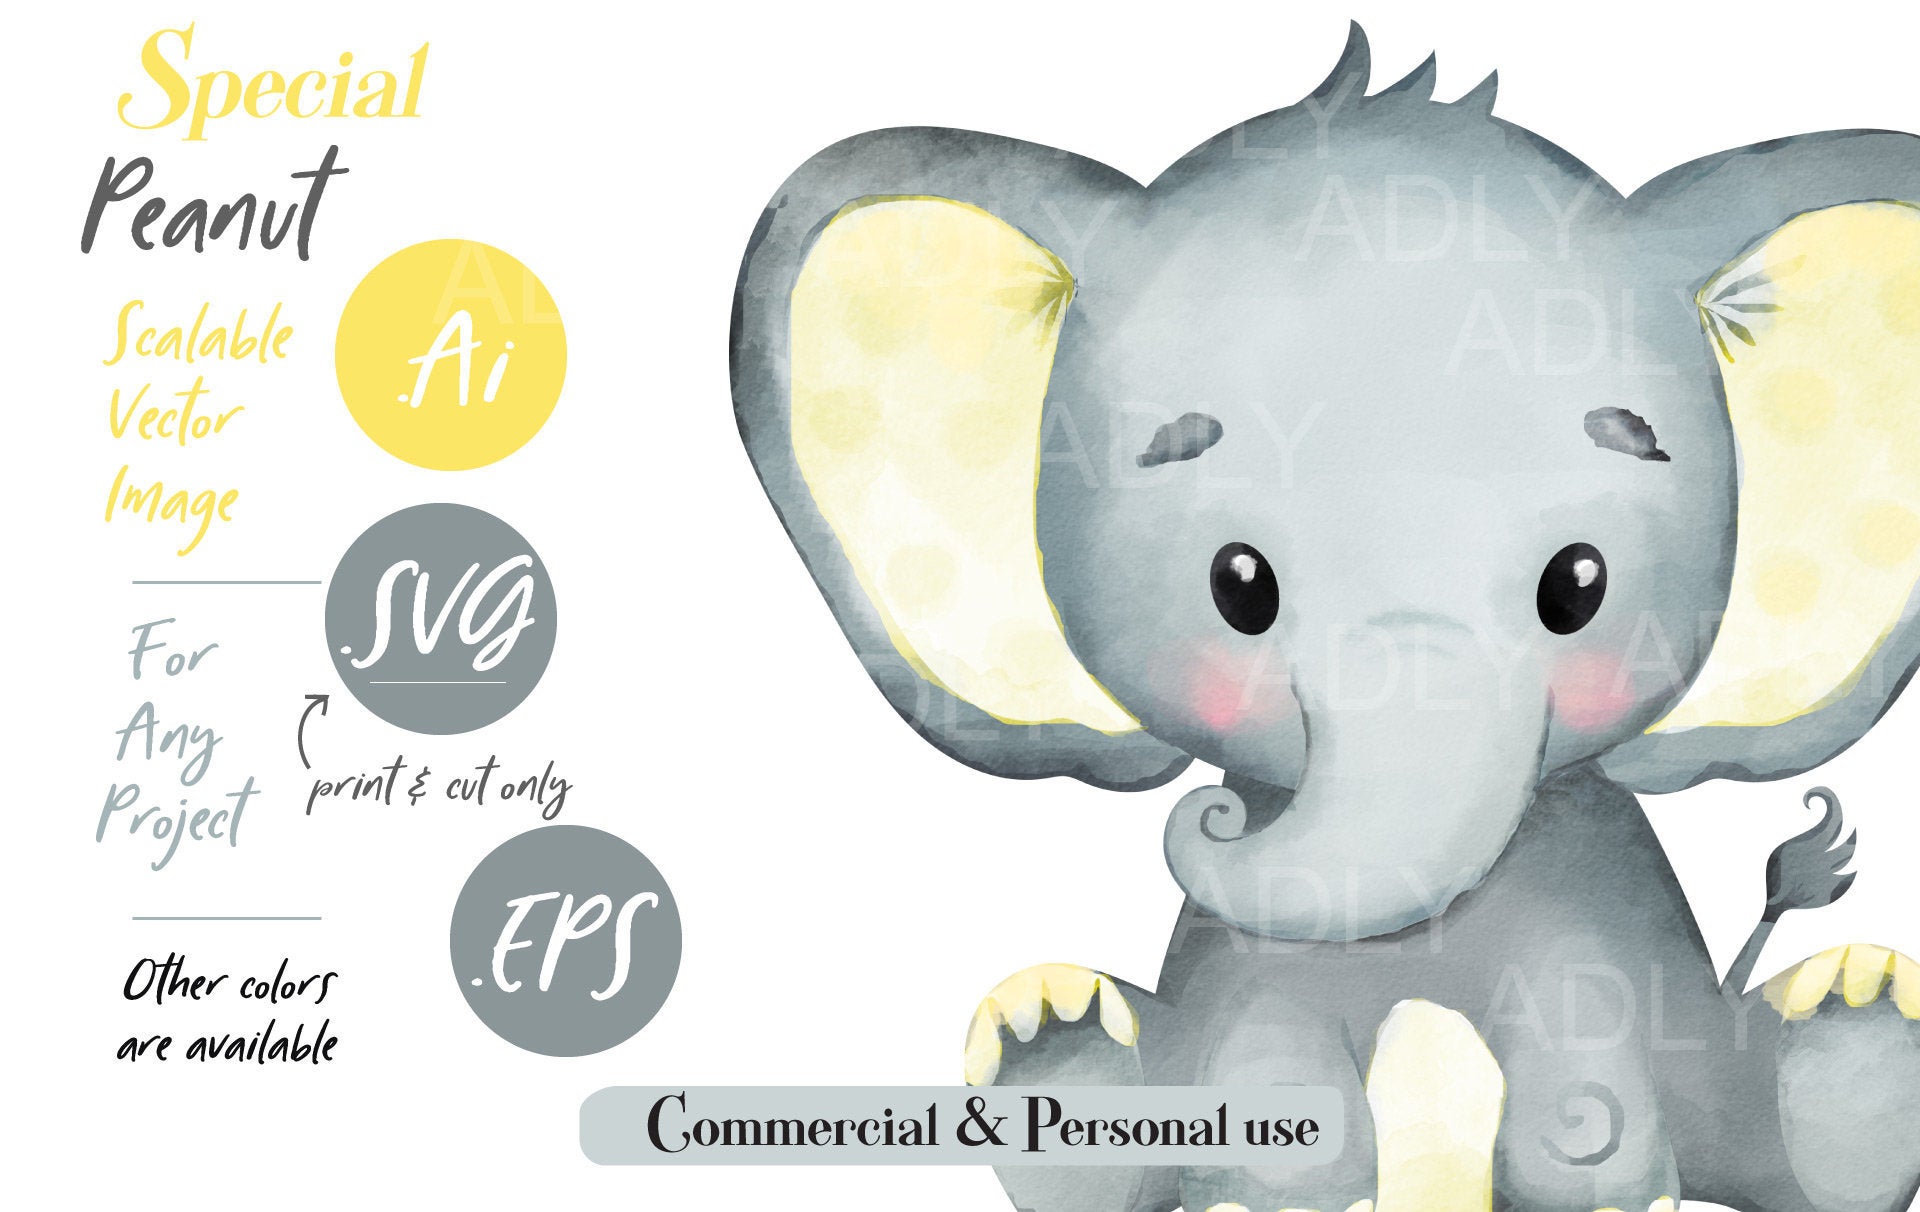 Download Baby Elephant, PNG, EPS, SVG, yellow color, Clip Art, vector